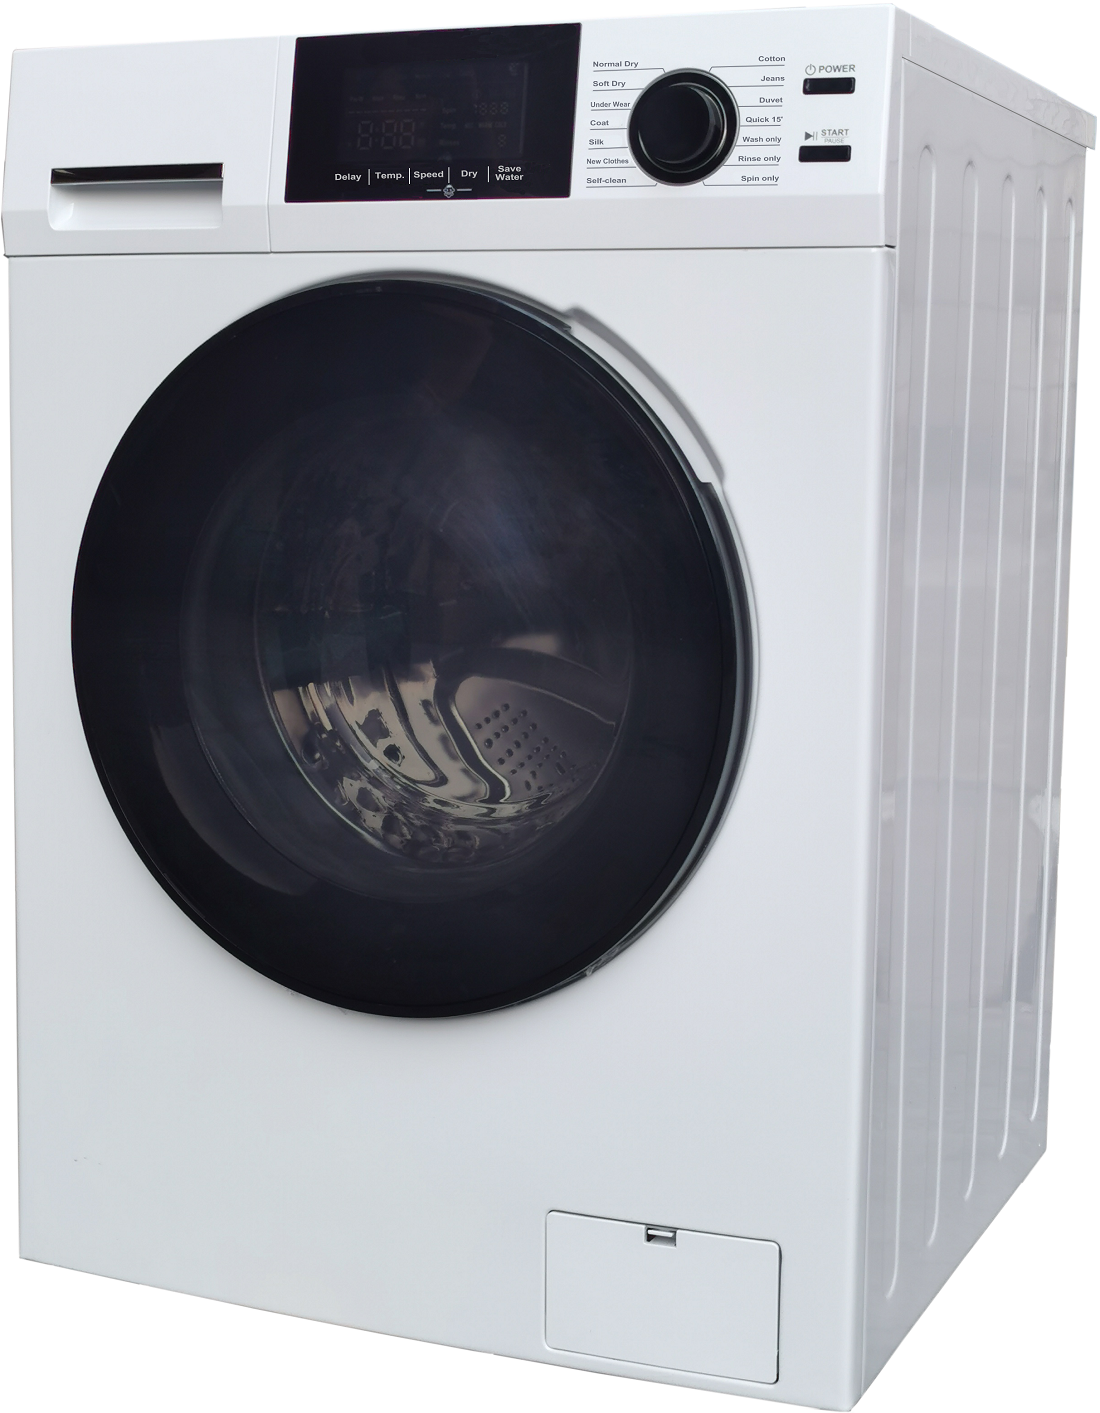 Heavy Duty Front-Load Washing Machine with Dryer